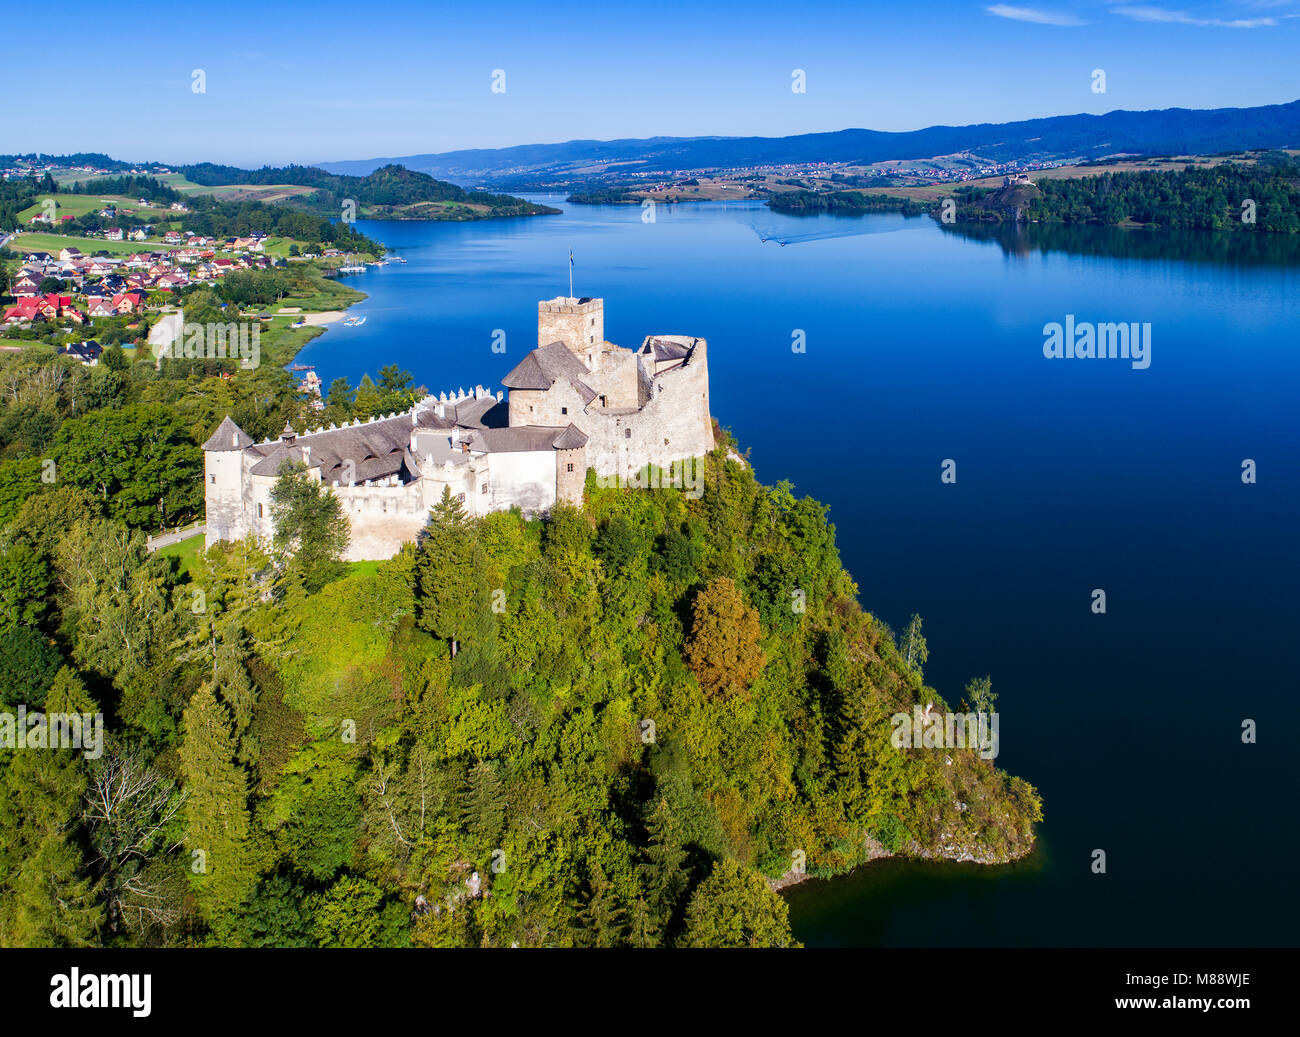 Poland. Medieval Castle in Niedzica, built in 14th century, artificial Czorsztyn Lake and far view of the ruins of Czorsztyn castle, Aerial view Stock Photo